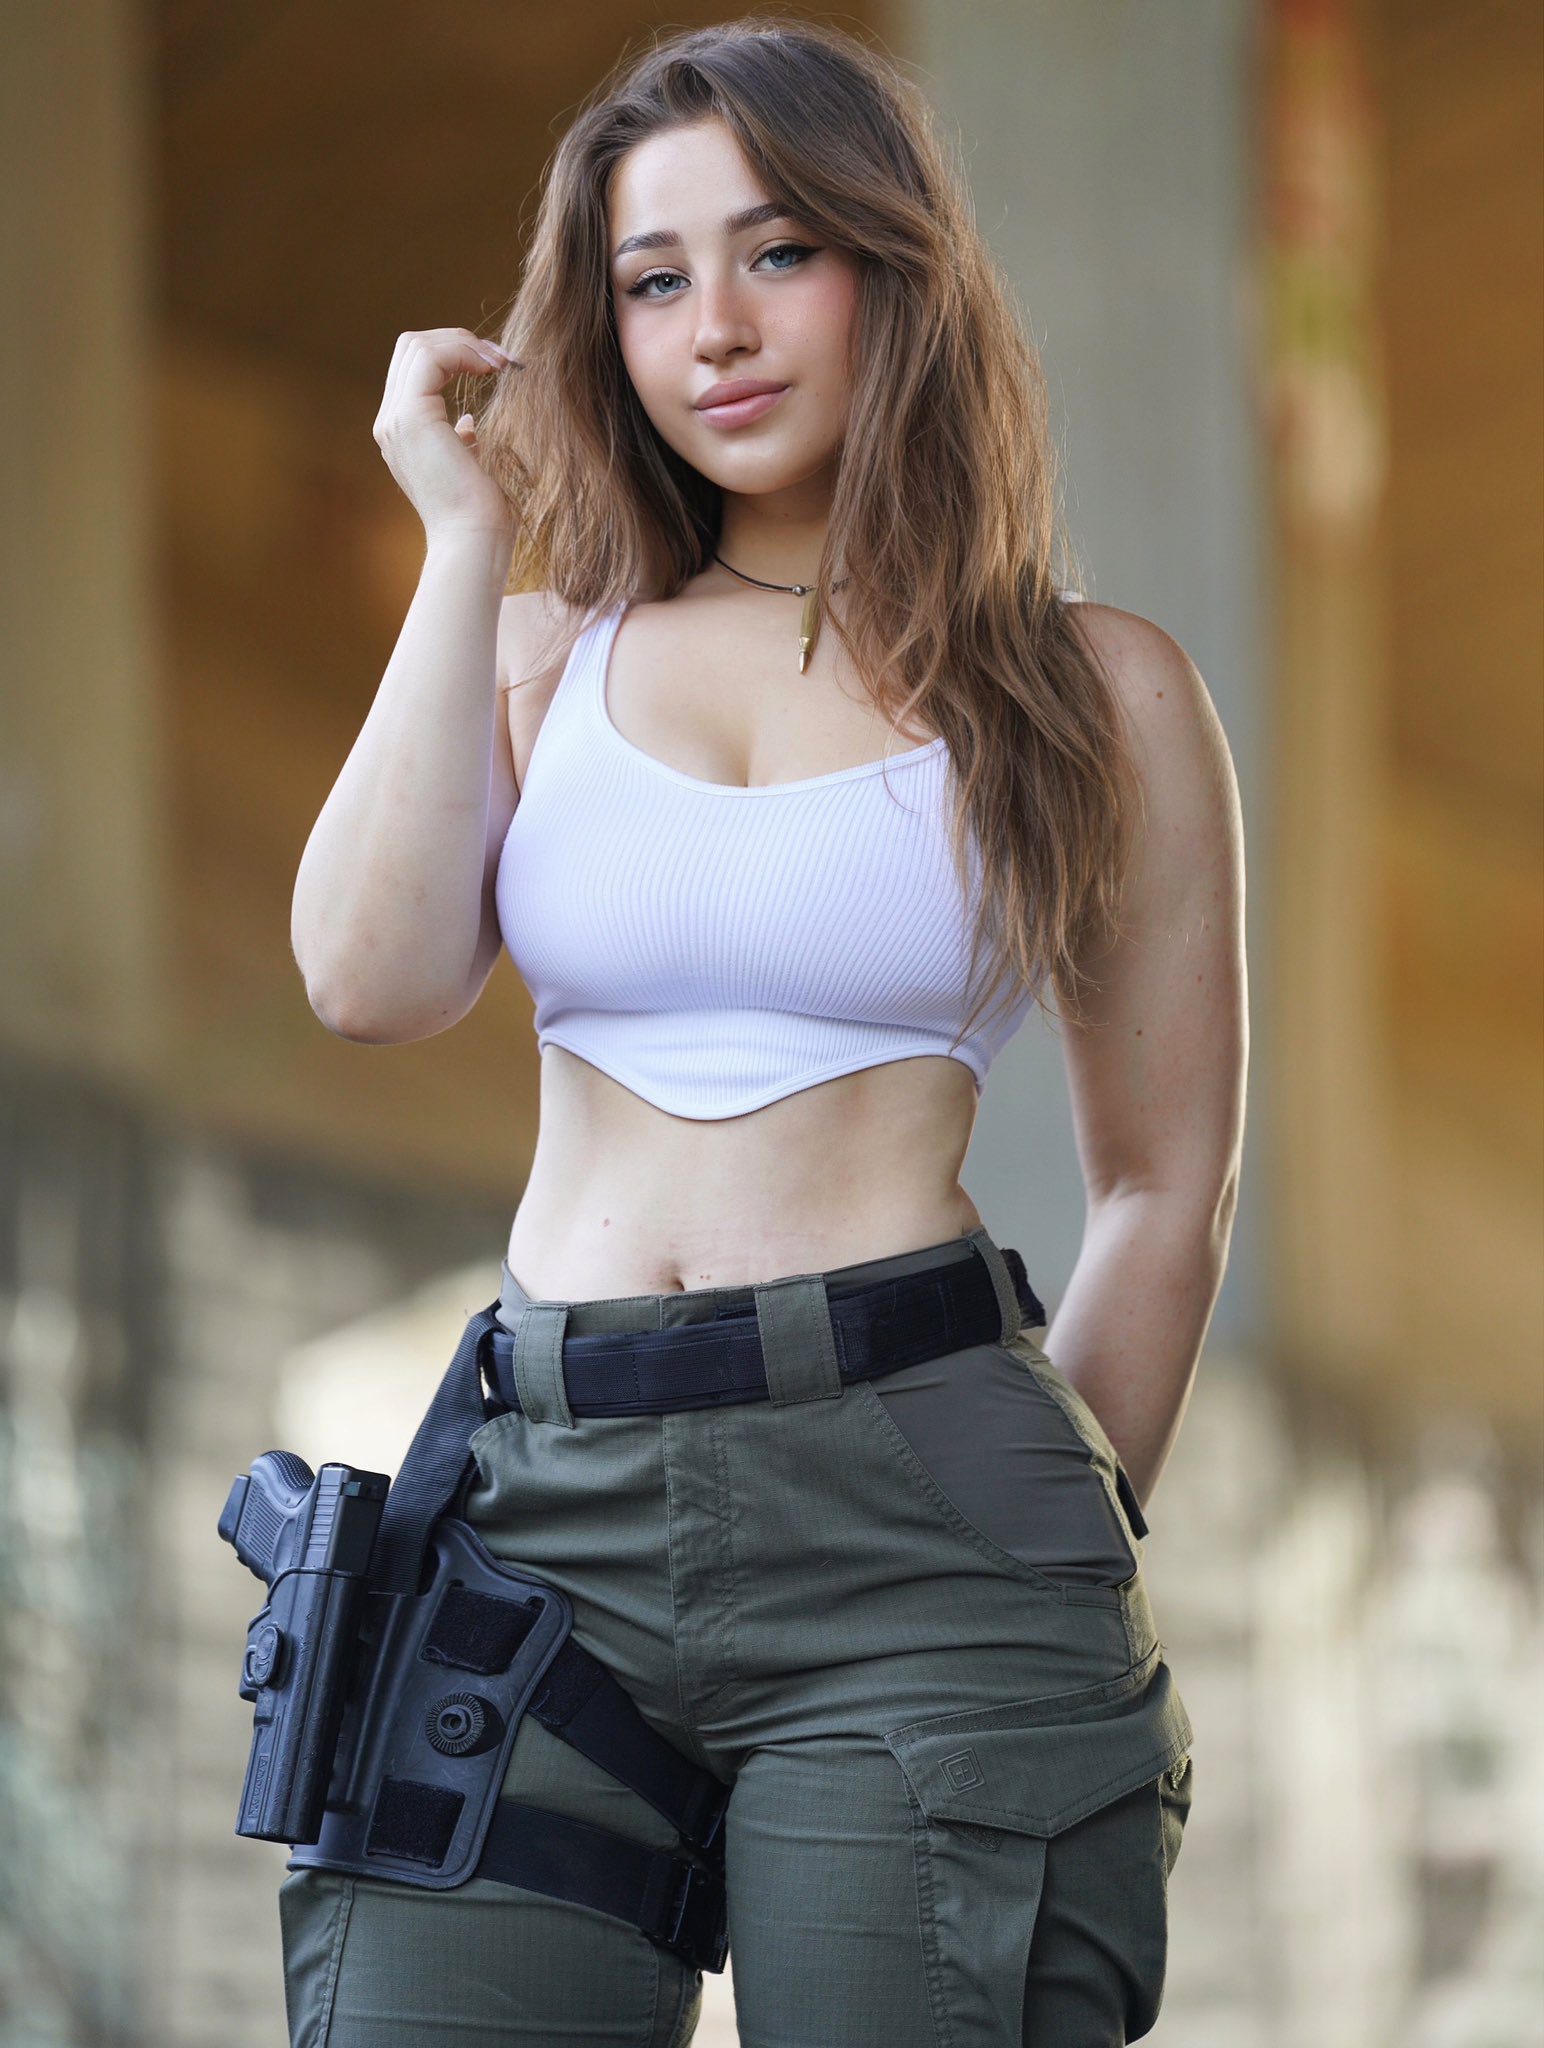 Natalia Fadeev- The Model Turned Soldier, Fighting for Peace in Israel